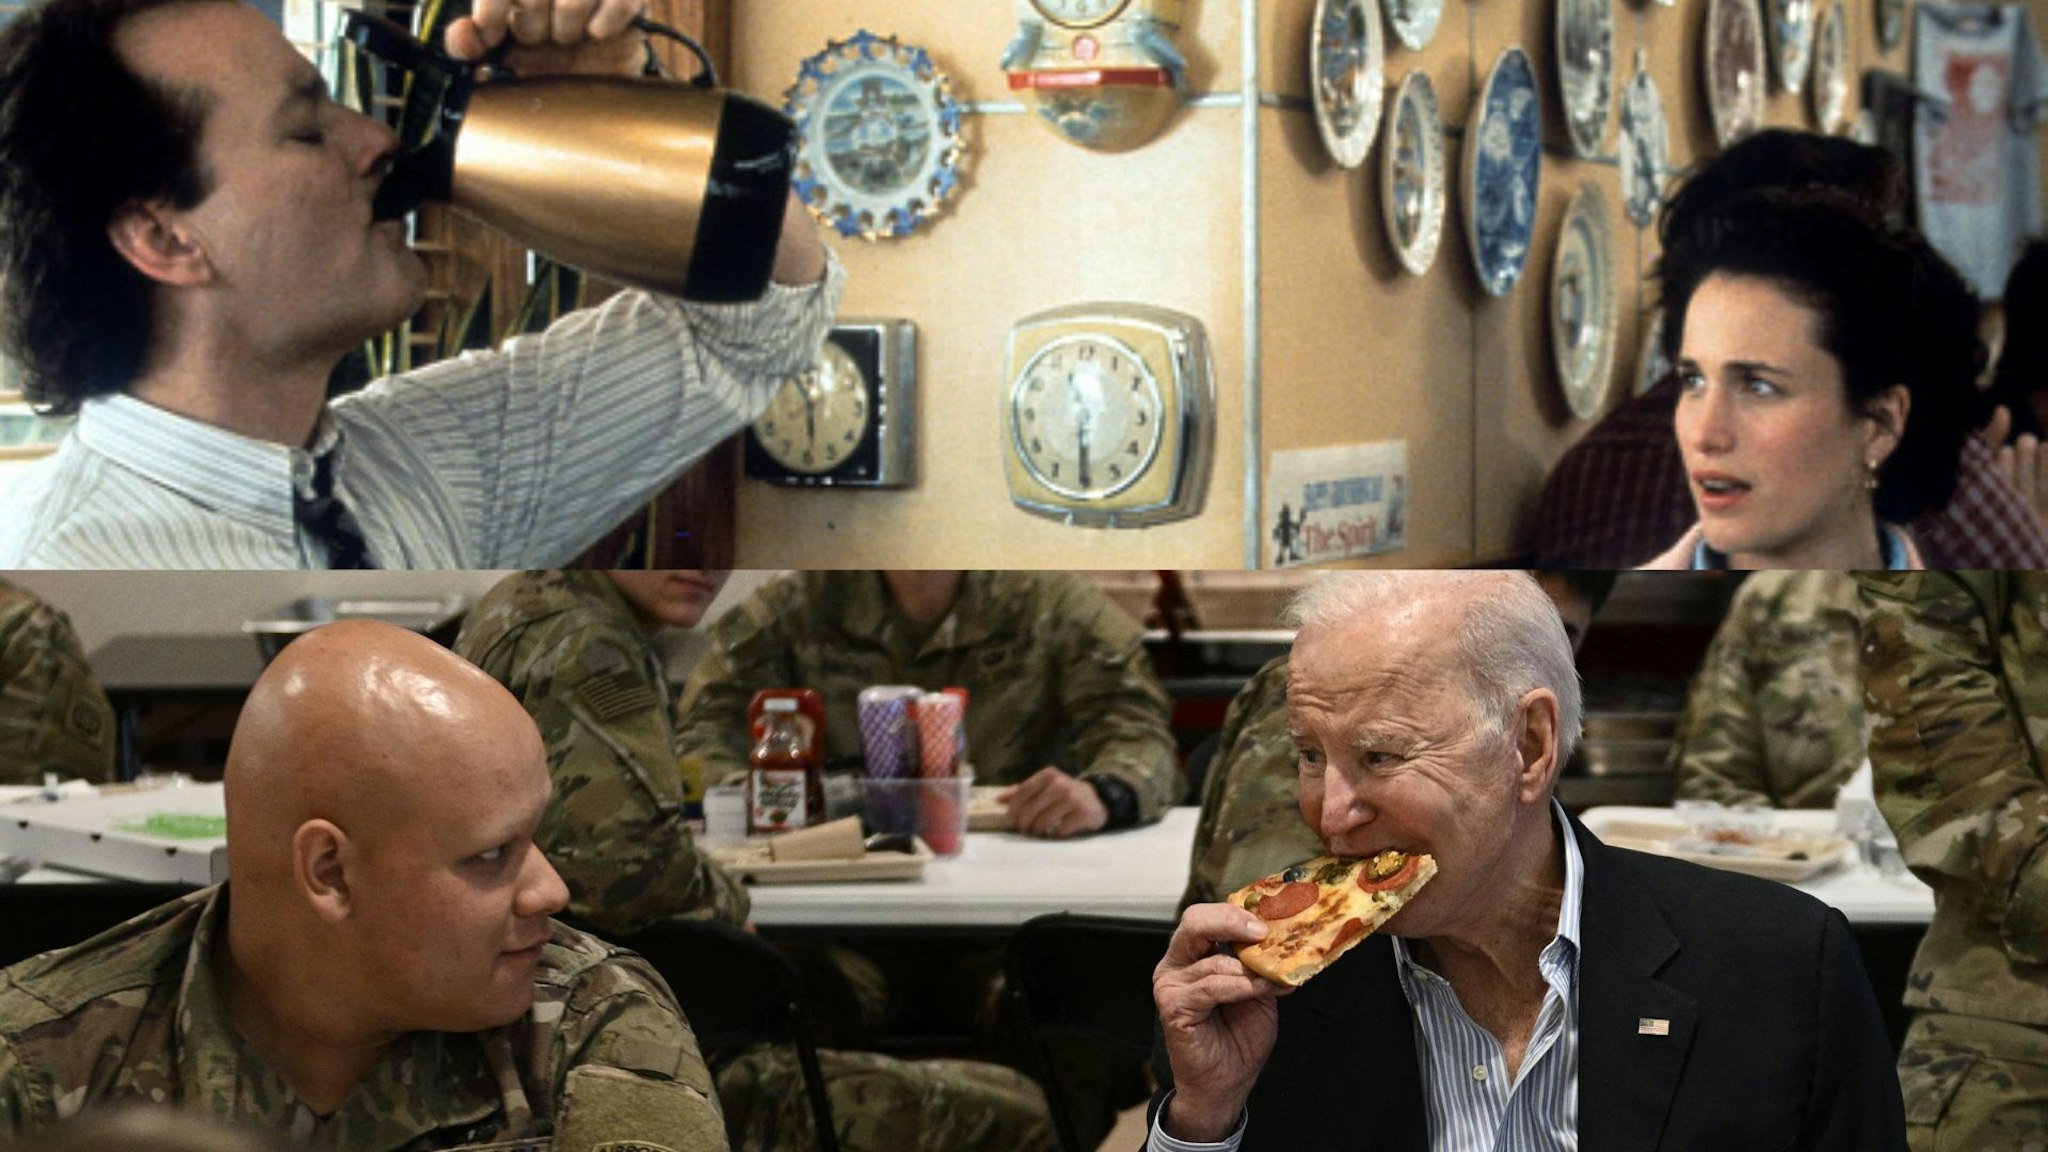 Bill Murray and Andie MacDowell in a scene from the film 'Groundhog Day', directed by Harold Ramis, 1993. US President Joe Biden (C) eats a pizza as he meets with service members from the 82nd Airborne Division, who are contributing alongside Polish Allies to deterrence on the Alliances Eastern Flank, in the city of Rzeszow in southeastern Poland, around 100 kilometres (62 miles) from the border with Ukraine, on March 25, 2022.